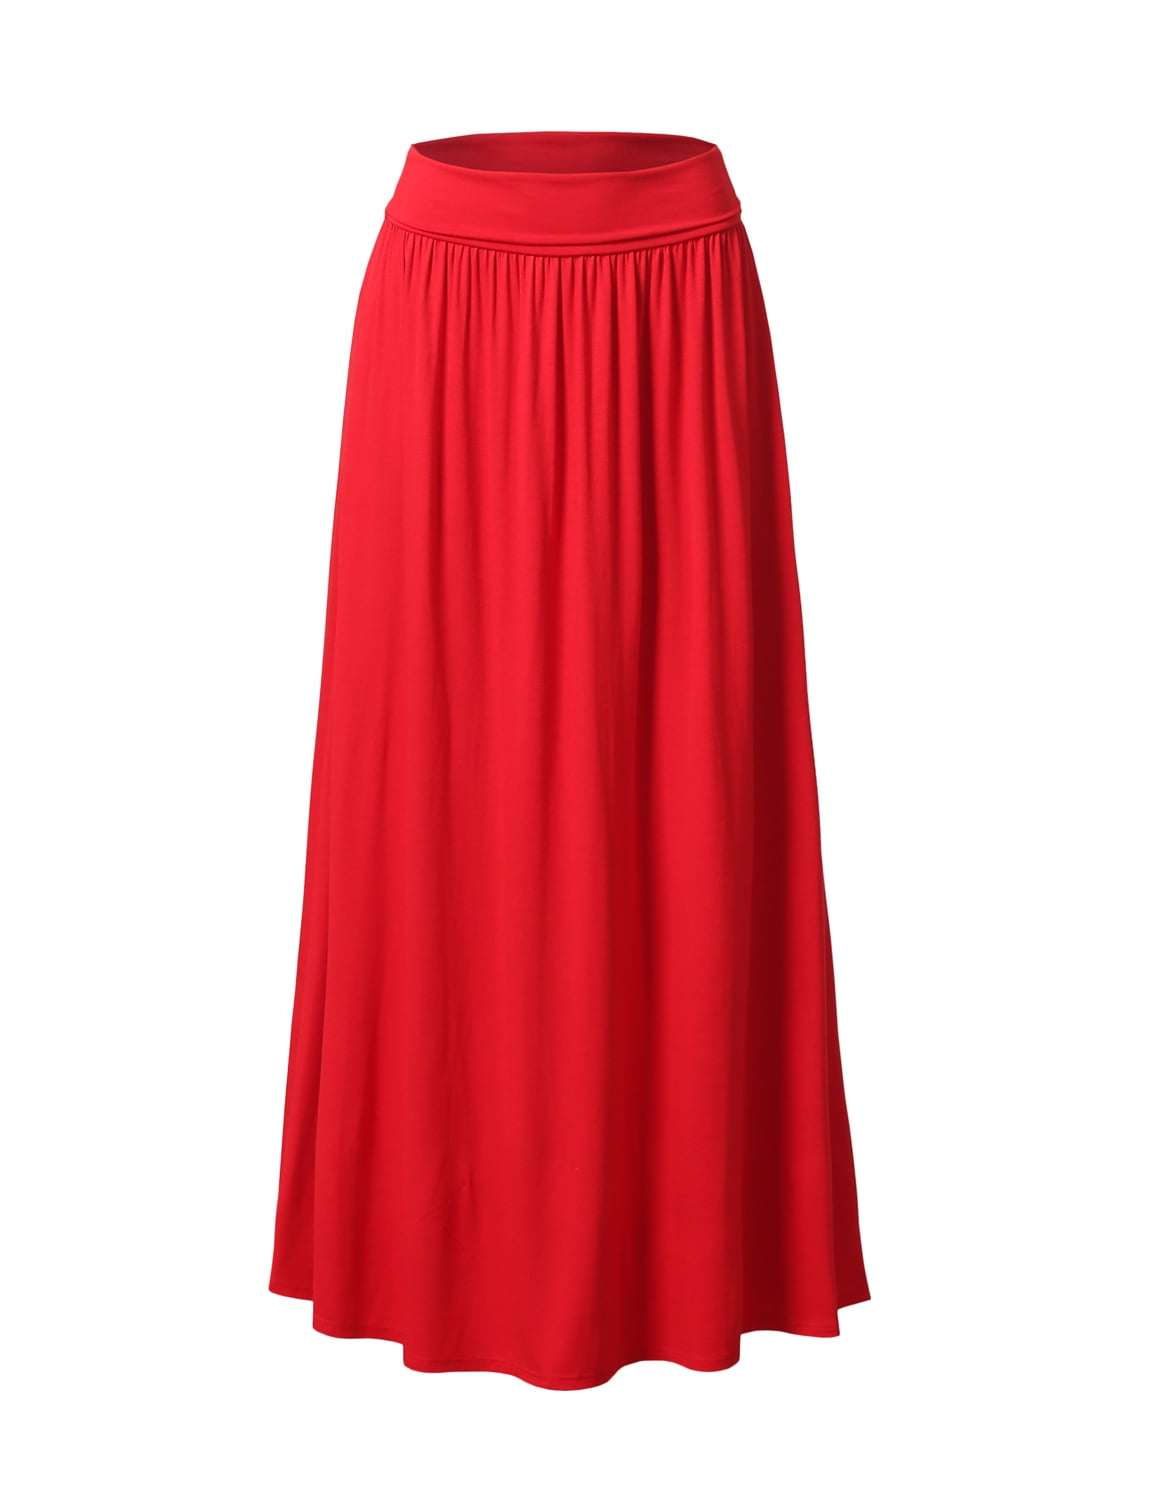 Doublju Women's Fold High Waist Ruched Maxi Skirt with Plus Size ...